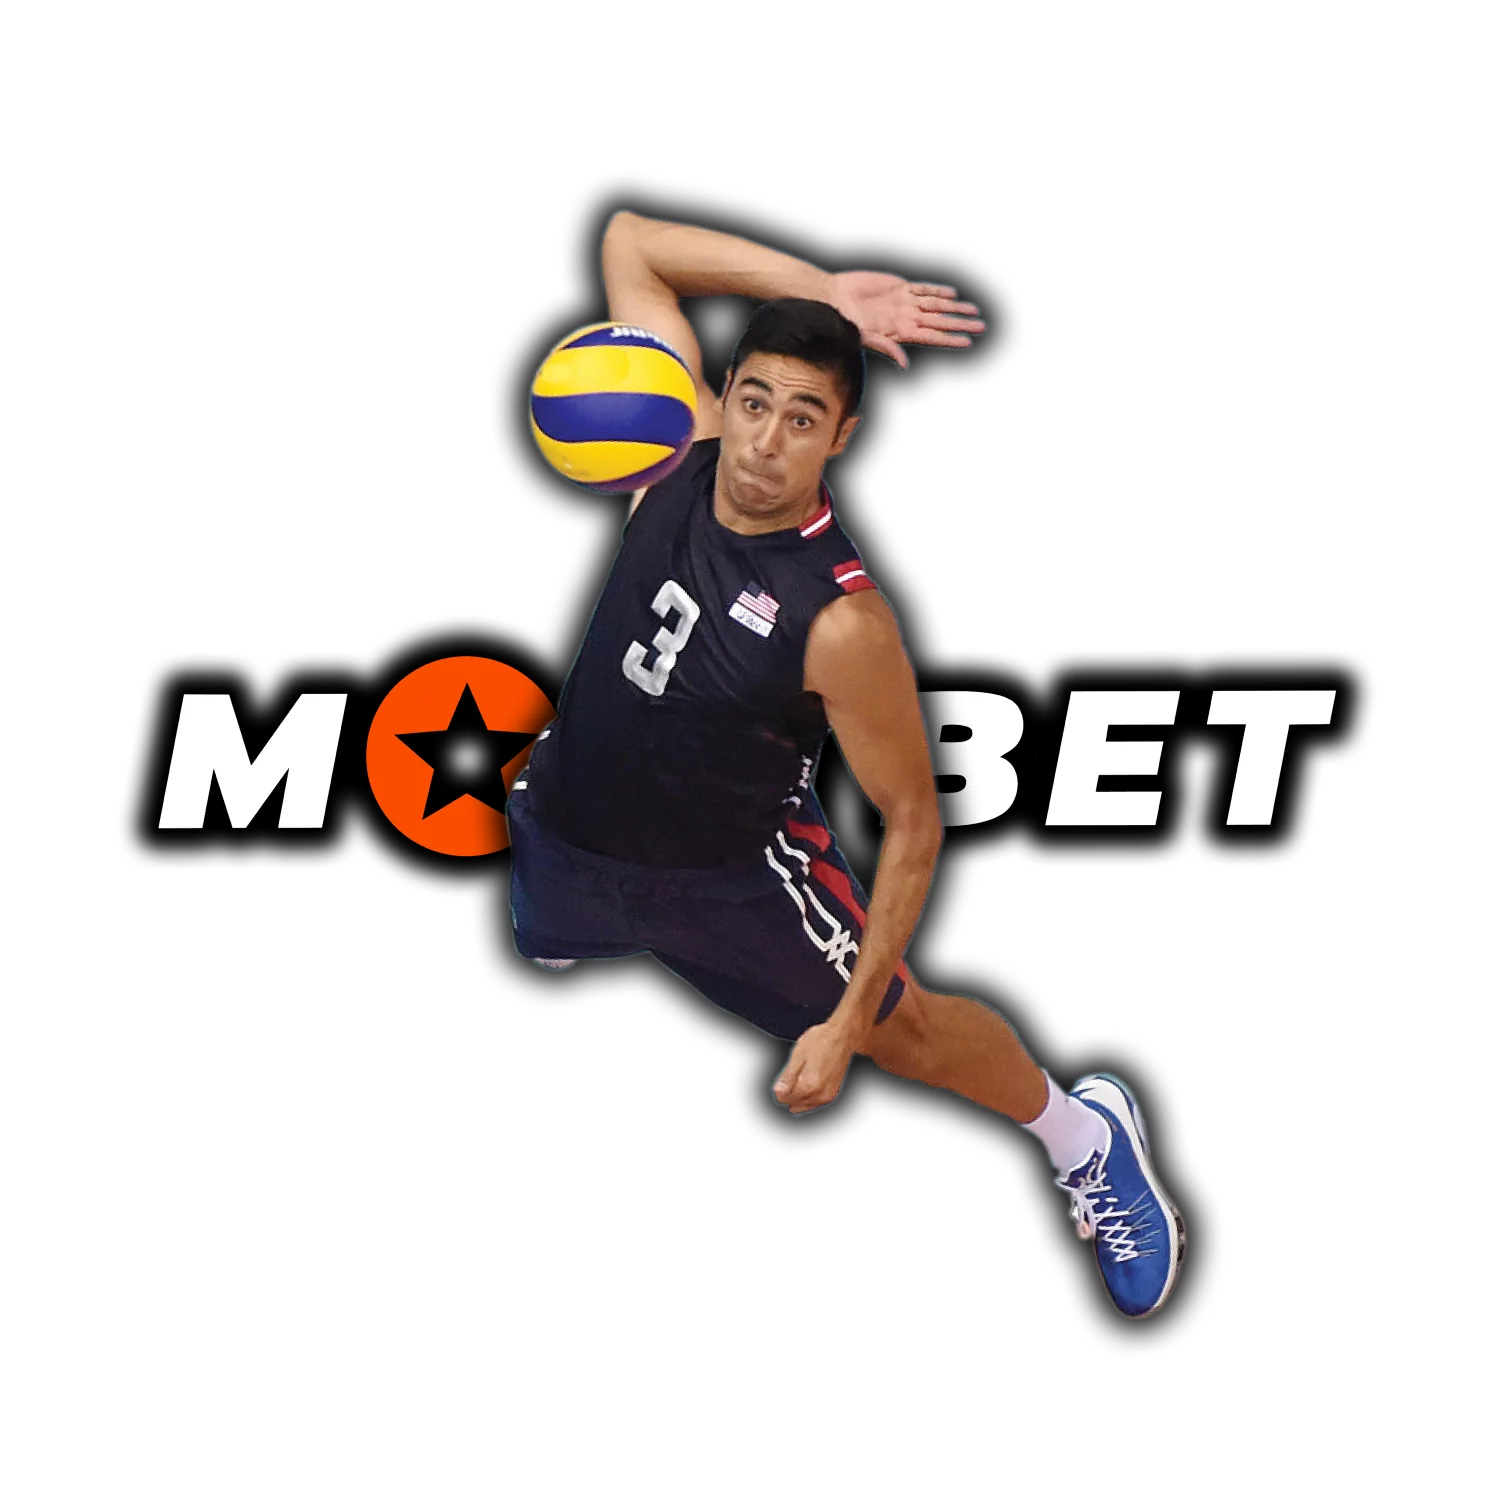 If you like volleyball, you should bet on Mostbet.